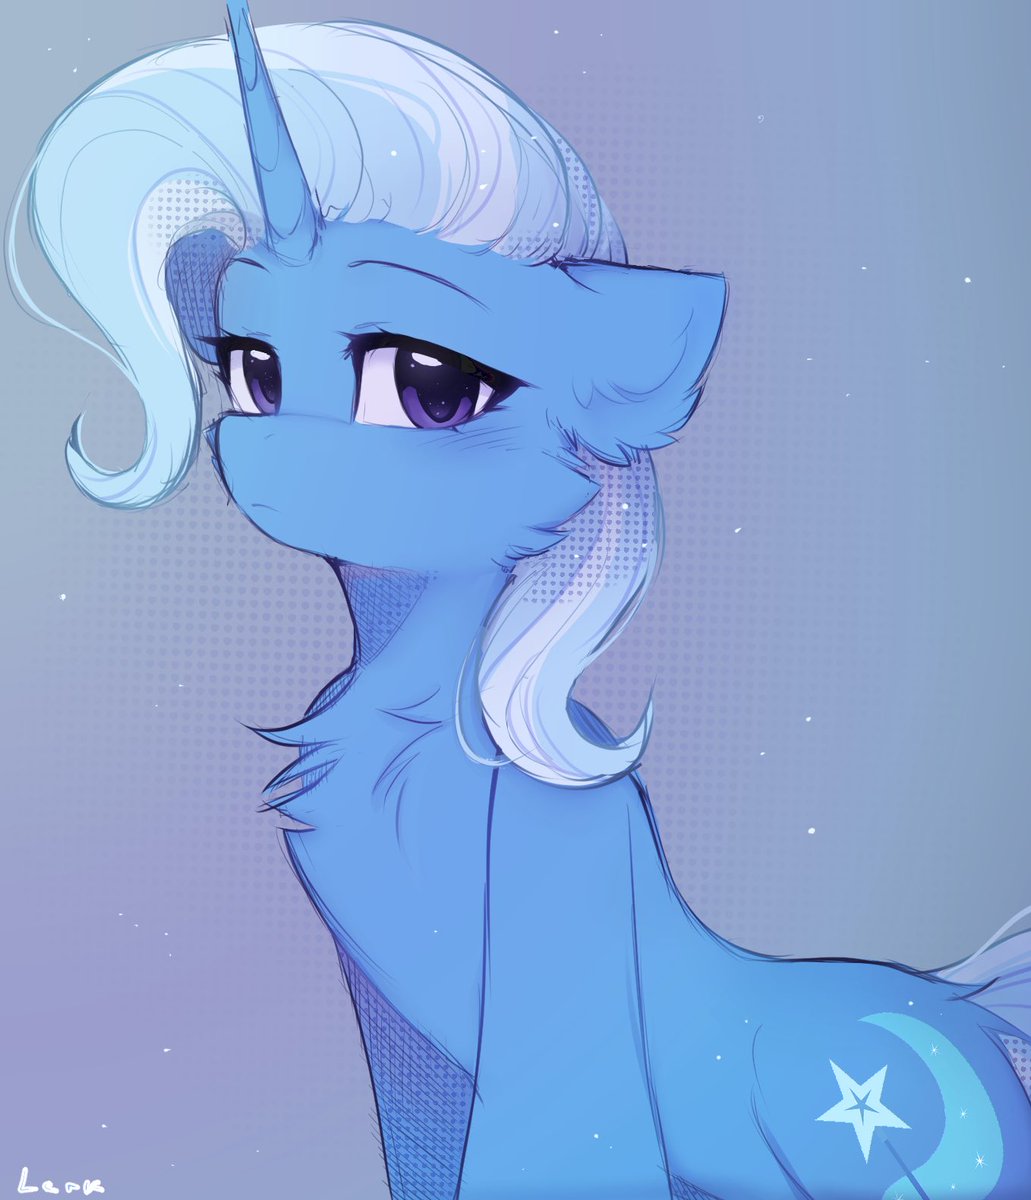 – The great an powerful Trixie (≧∀≦)
#MLP #MyLittlePony #Art #Cute #Fanart